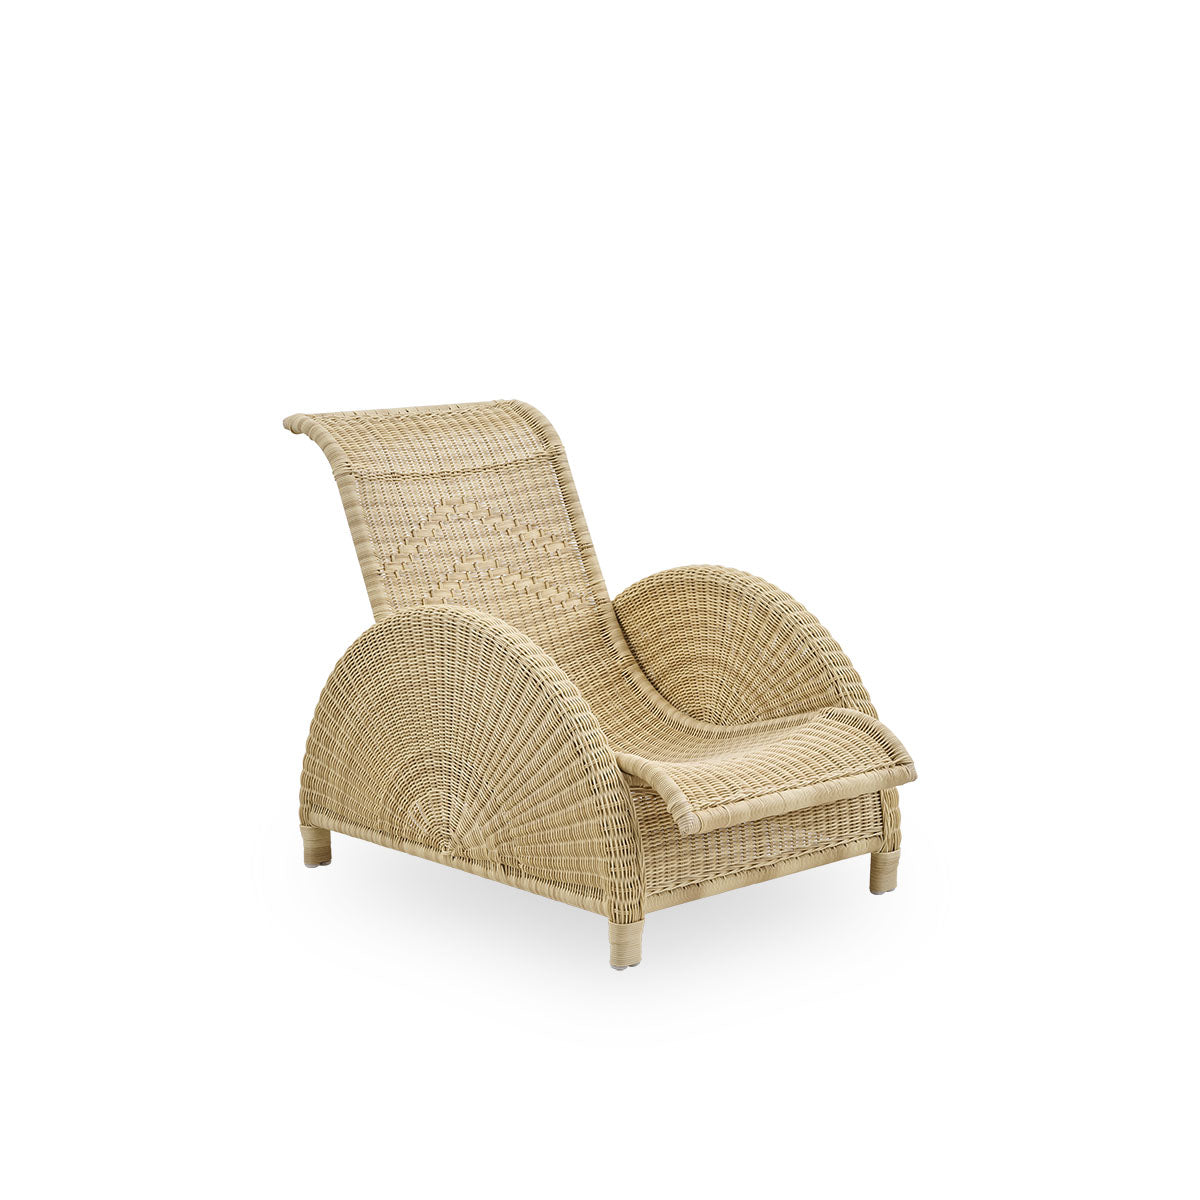 Paris Exterior Lounge Chair by Sika